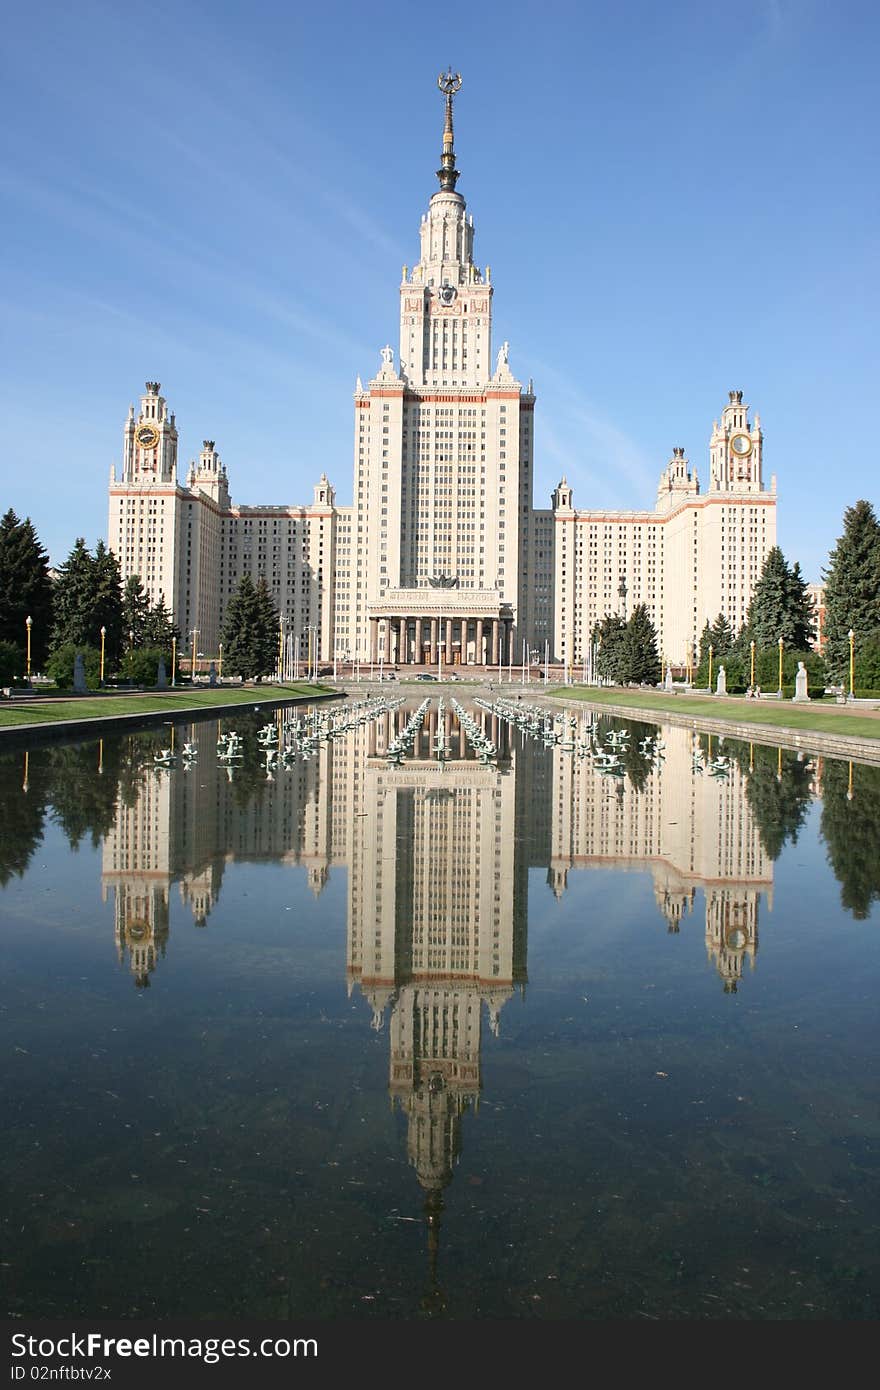 Morning photo. The front Lomonosov Moscow State University Main Building (alma-mater for about 40000 students and teachers). Morning photo. The front Lomonosov Moscow State University Main Building (alma-mater for about 40000 students and teachers).